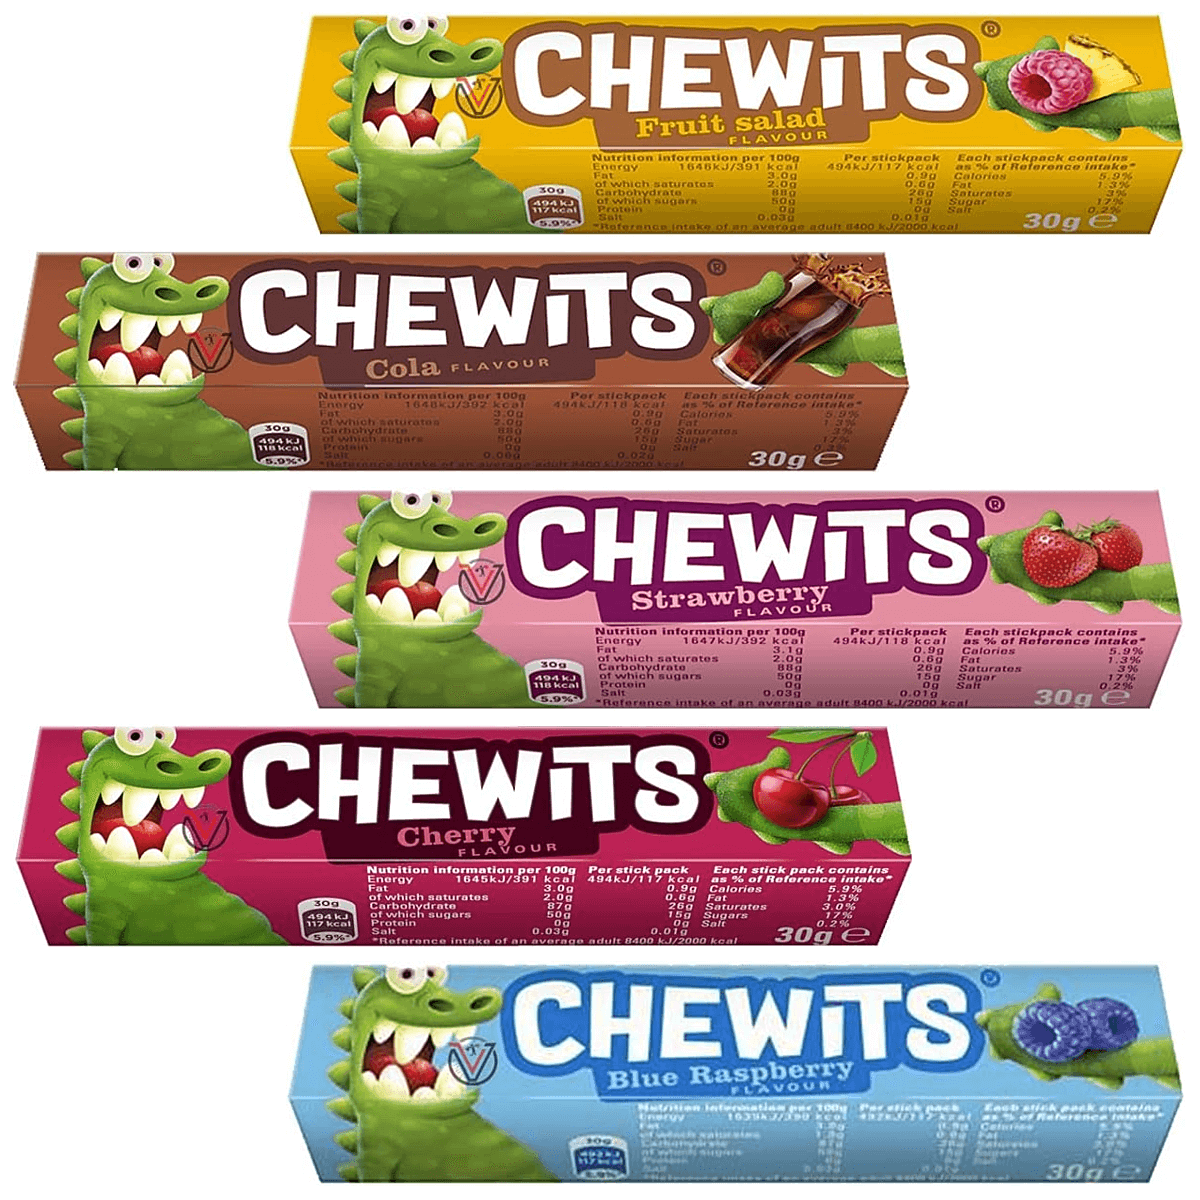 Five sticks of Chewits, Fruit Salad (orange), Cola (brown), Strawberry (pink), Cherry (red), Blue Raspberry (blue)